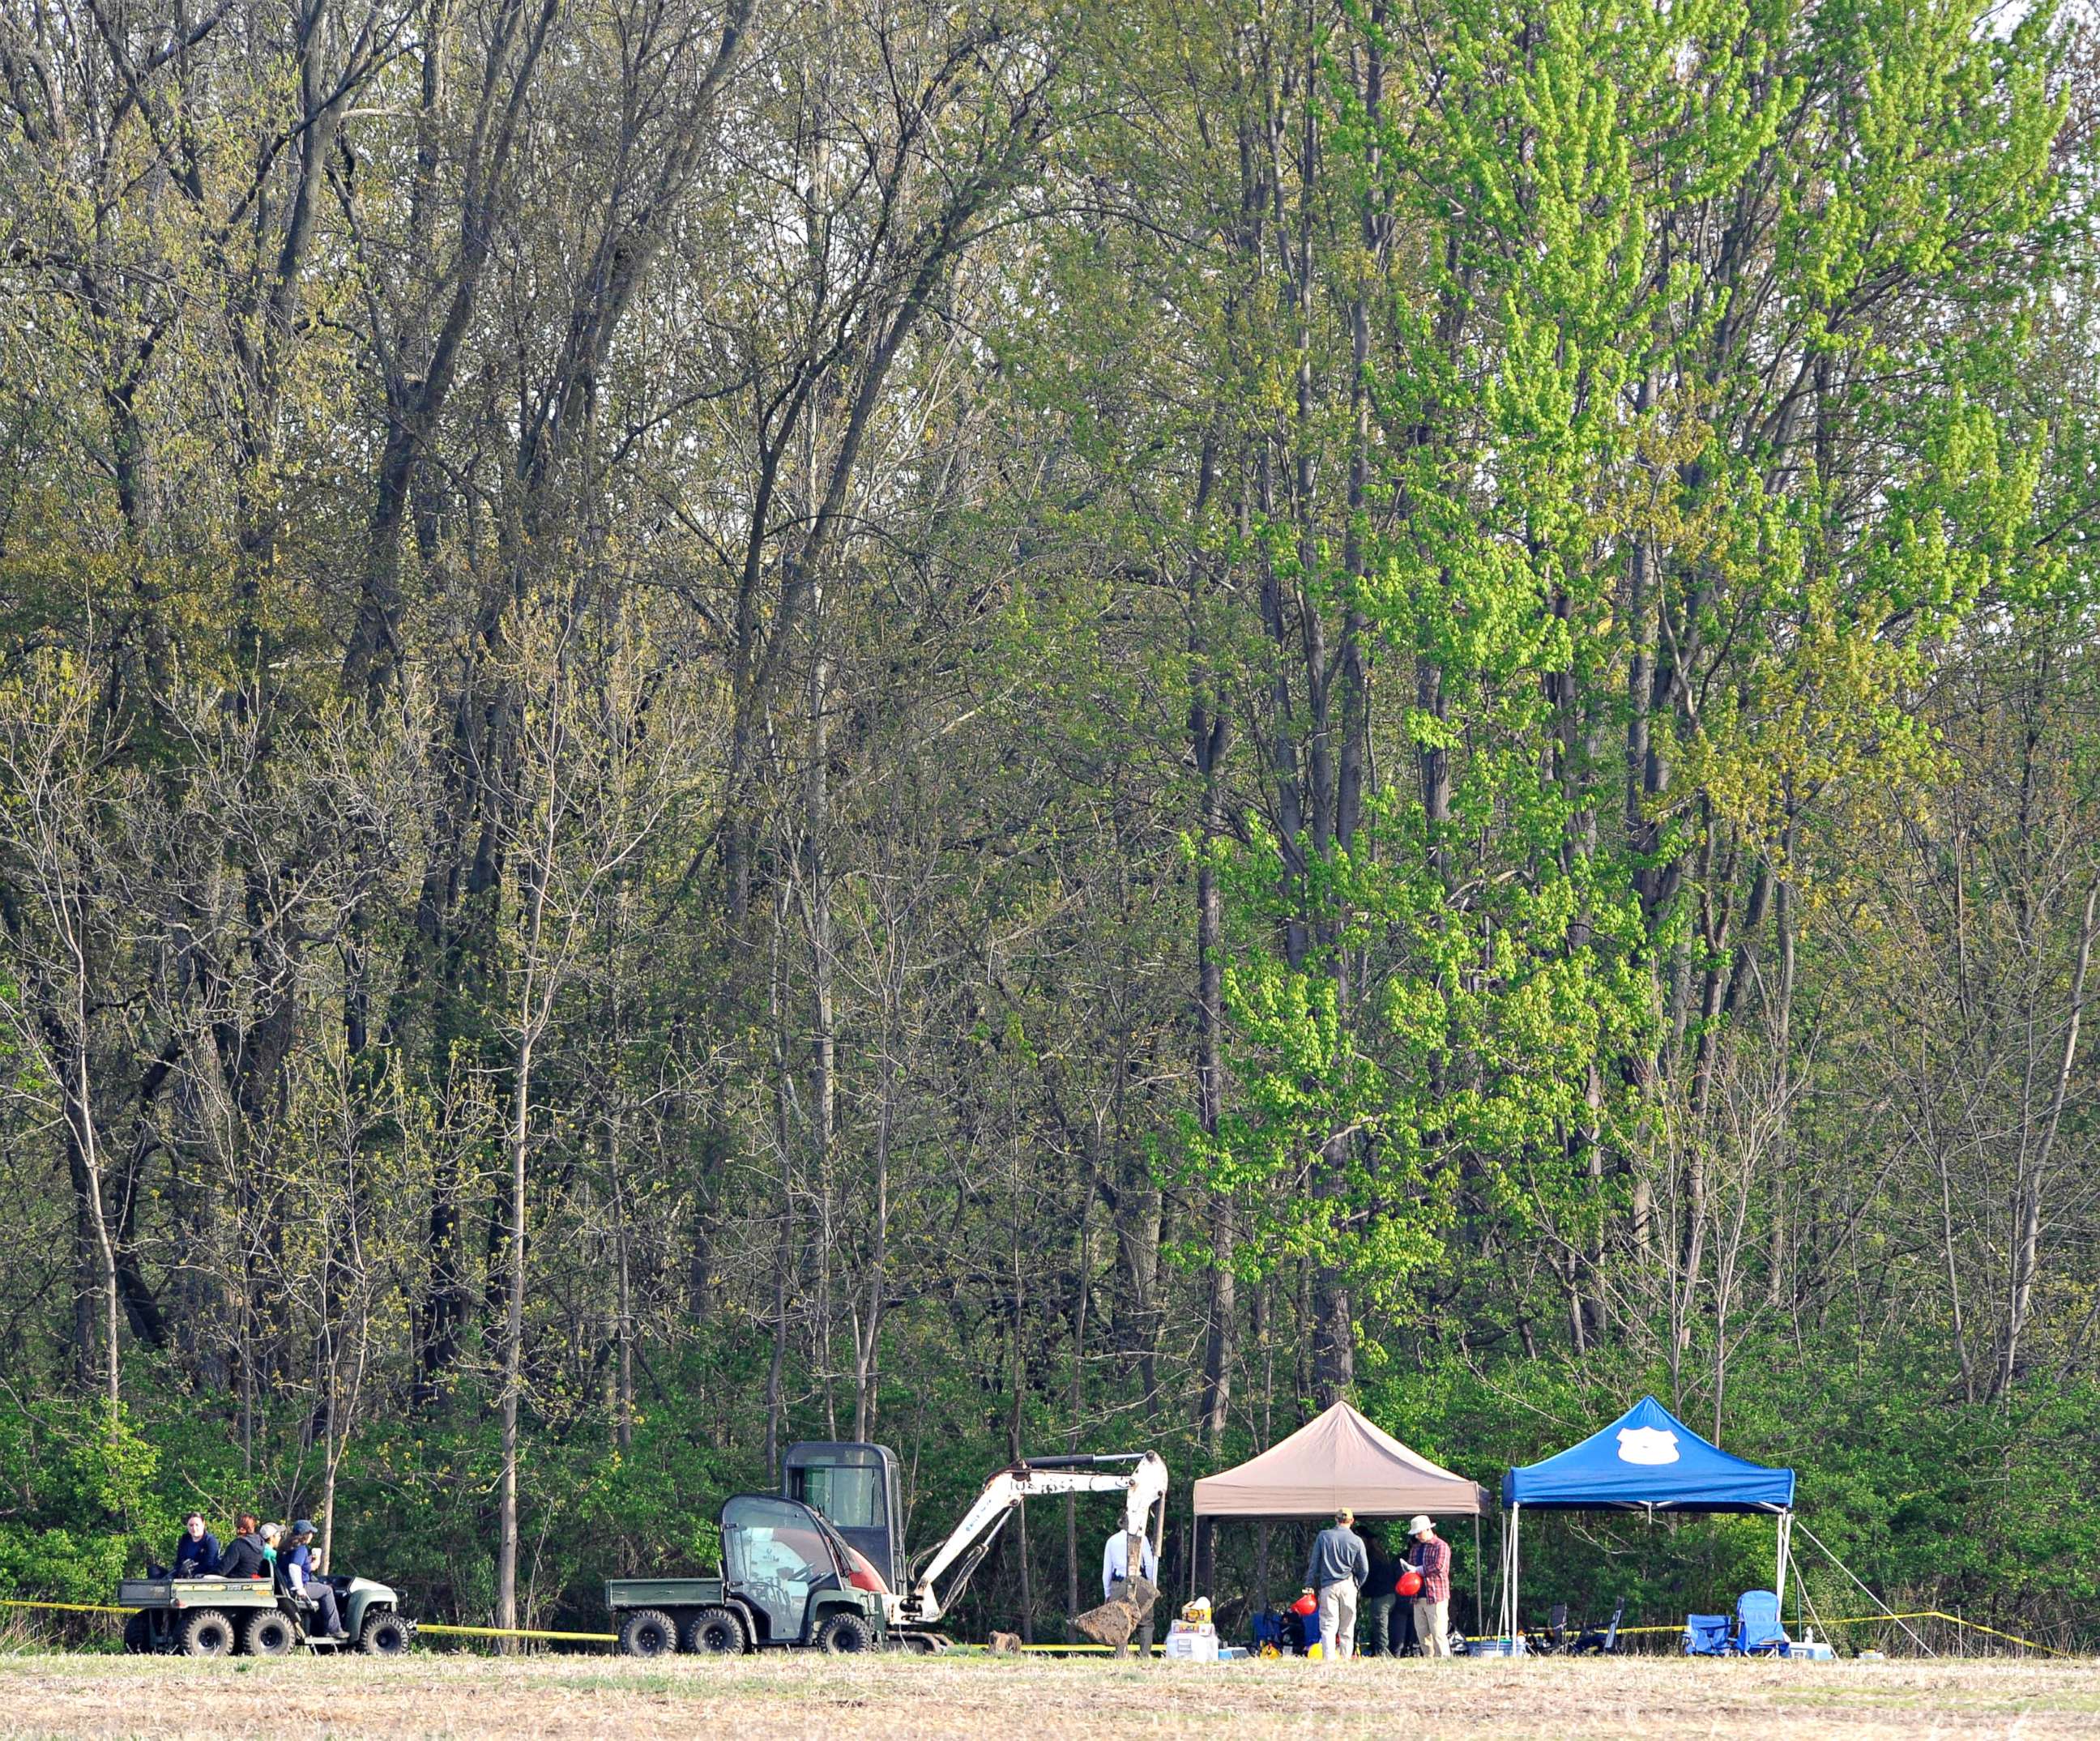 PHOTO: Investigators set up their equipment under tents before beginning their work at a dig site along a rural wooded area in Macomb Township, Mich., May 9, 2018.